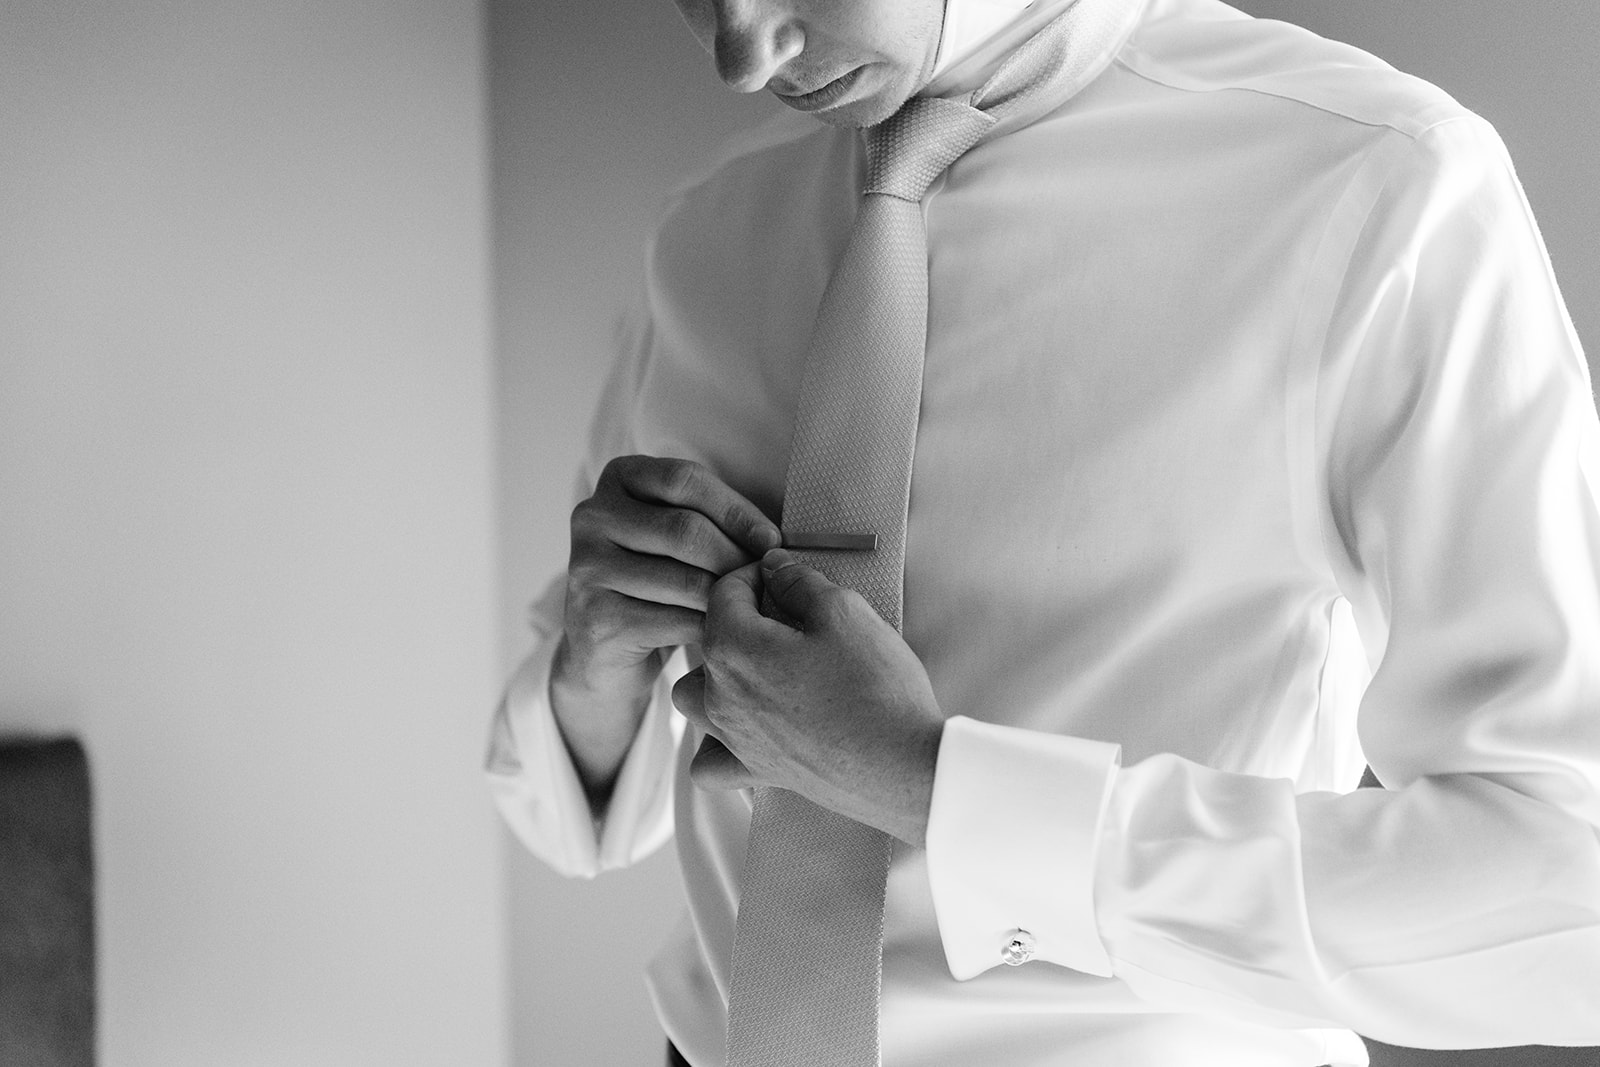 Groom buttoning shirt at a Bury Manor Barn Wedding in Sussex. Photographer OliveJoy Photography.